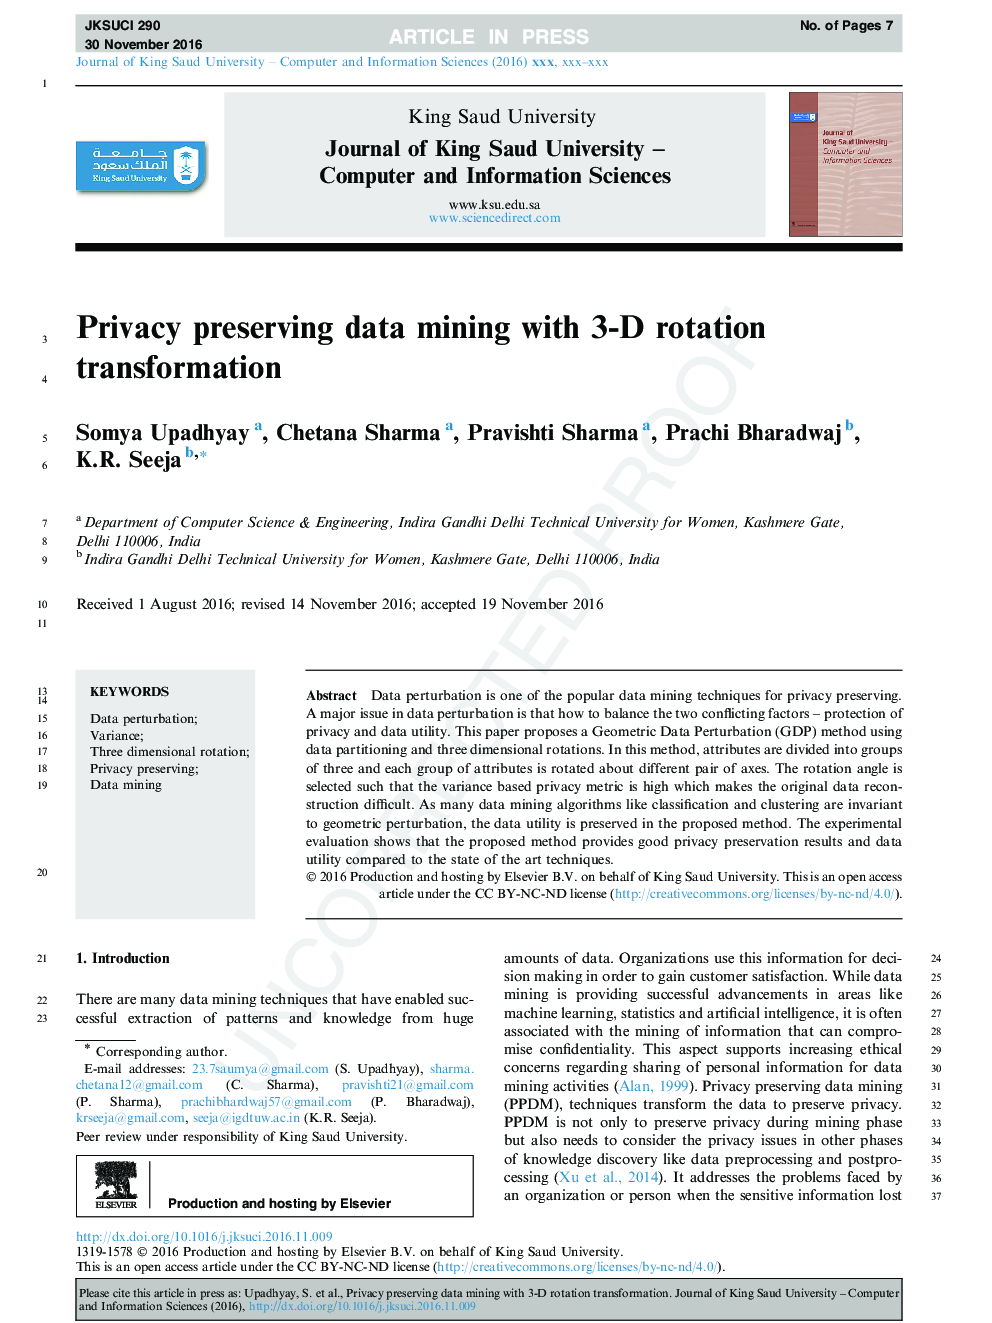 Privacy preserving data mining with 3-D rotation transformation